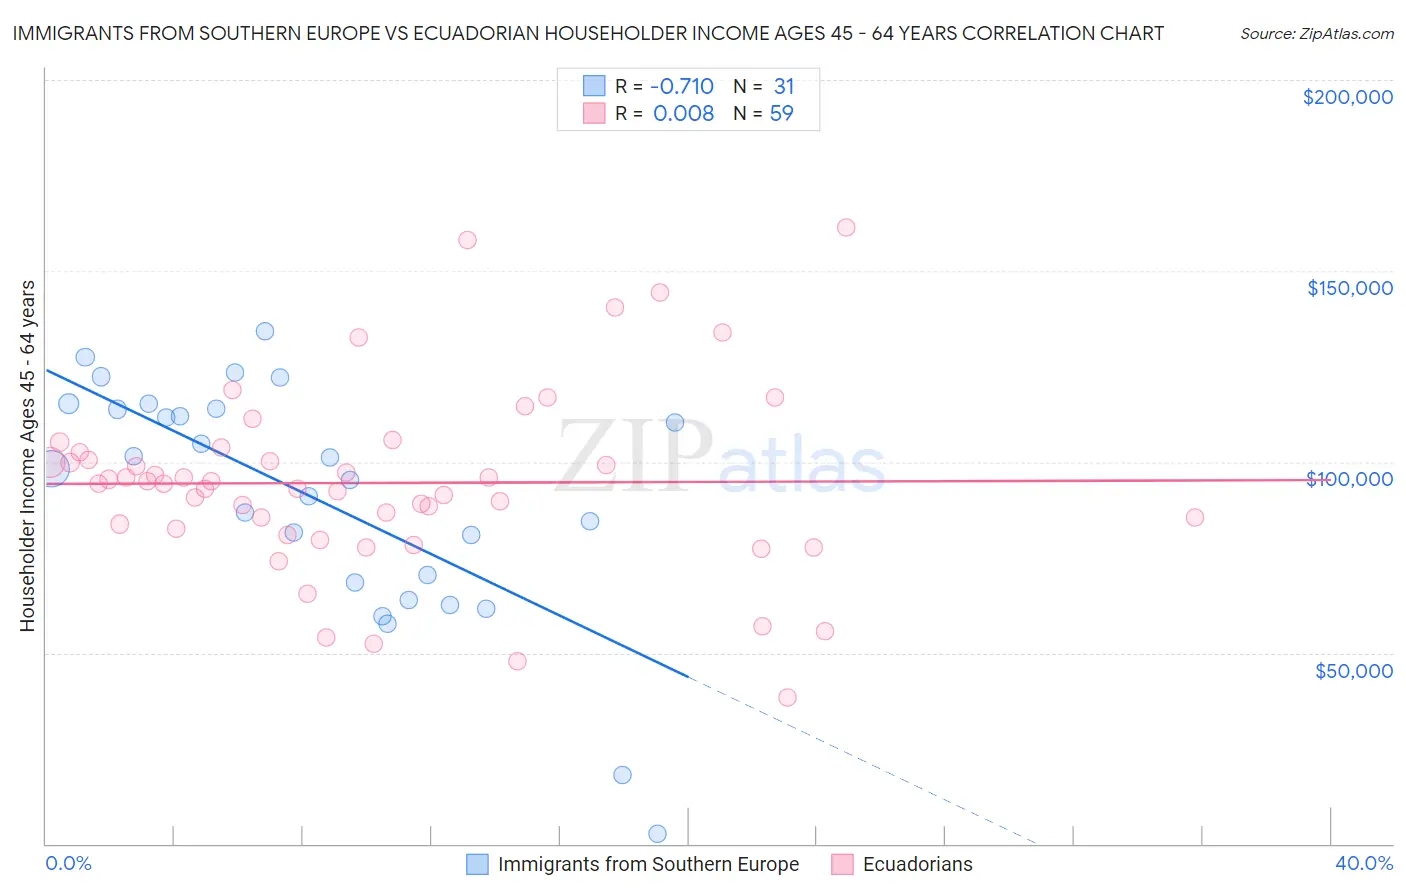 Immigrants from Southern Europe vs Ecuadorian Householder Income Ages 45 - 64 years